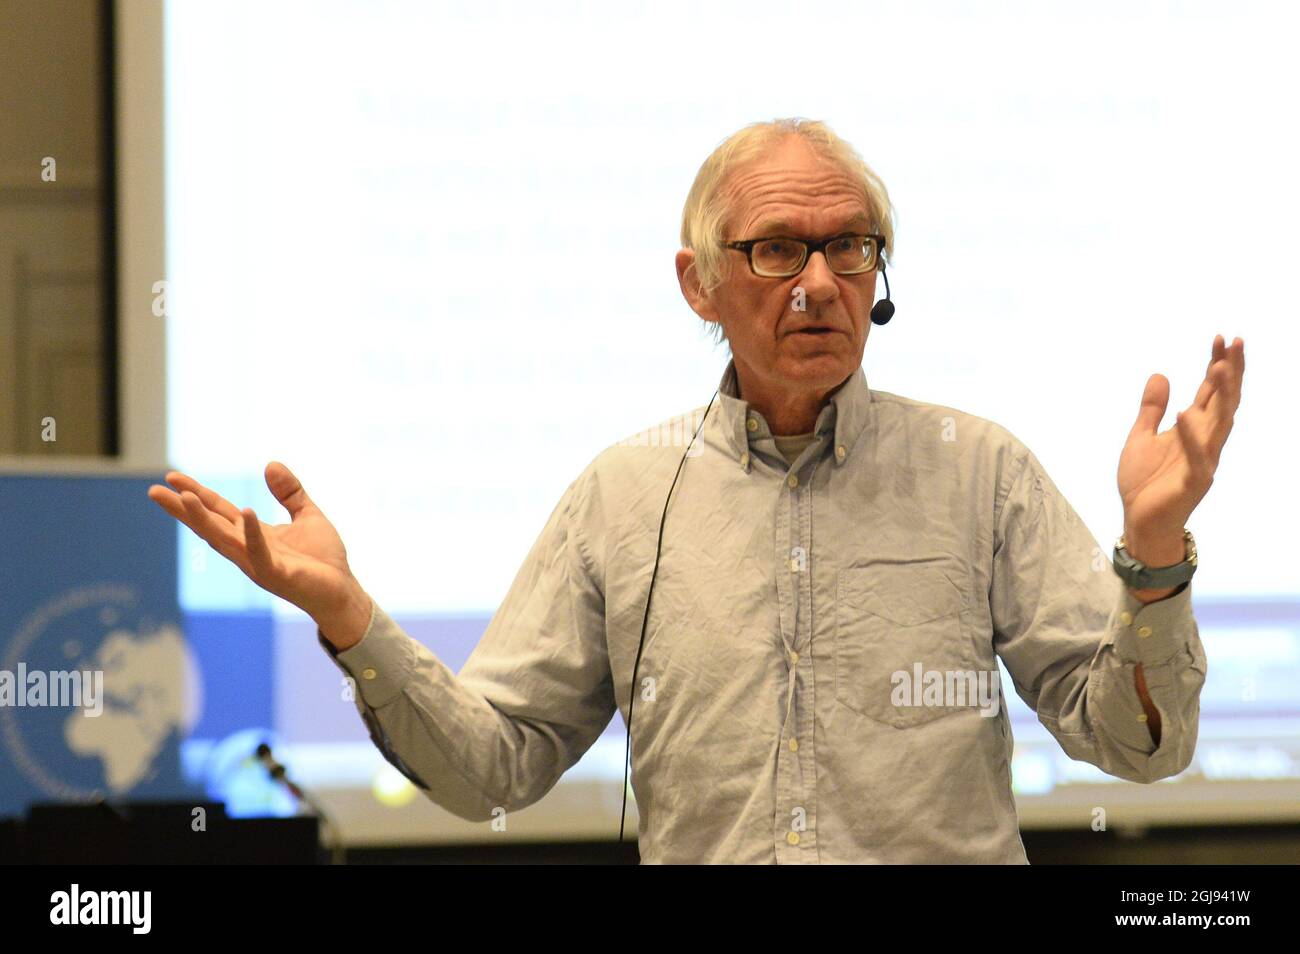 KARLSTAD 2015-03-16 Swedish artist and cartoonist Lars Vilks is seen during his lecture on ' Charlie Hebdo and the limits of Free SpeechÂ” in Karlstad, Sweden, March 16, 2015. Vilks, who once depicted the Prophet Muhammad as a dog, is believed to be one of the targets in a gun attack in Copenhagen last month. His lecture was surrounded by armed police. Foto: Maja Suslin / TT / kod 10300  Stock Photo